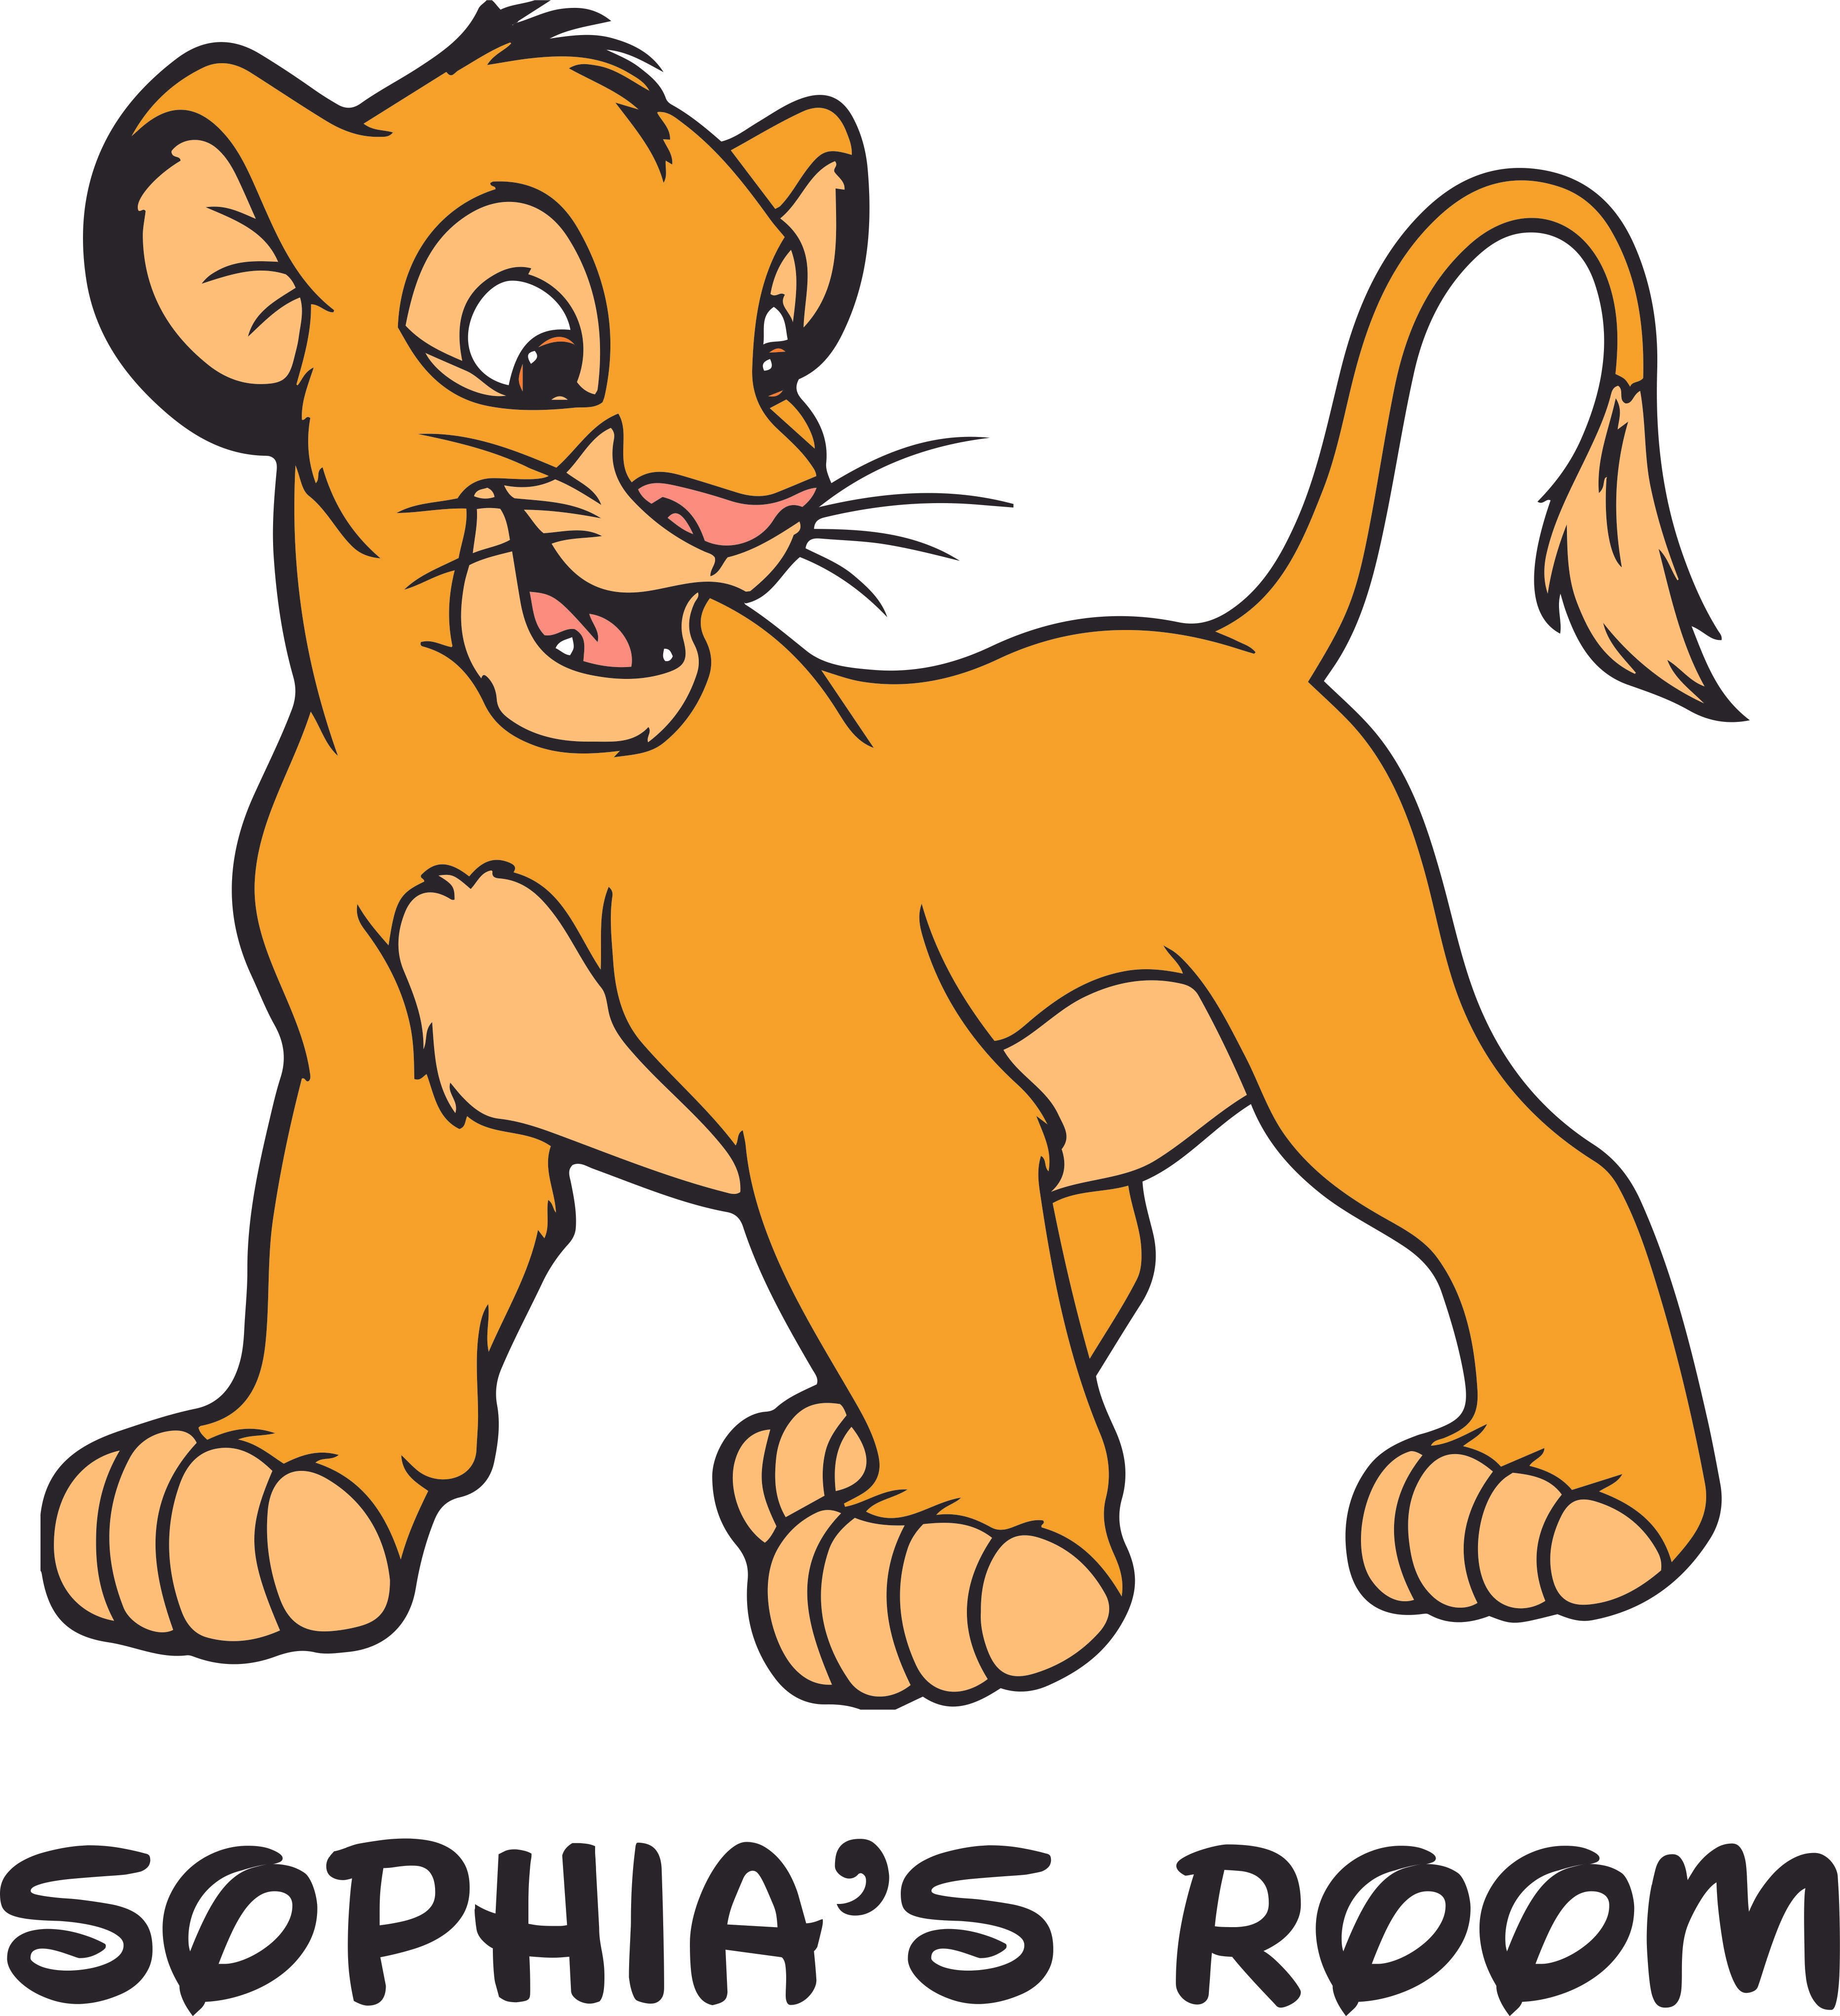 Cute Simba Baby Lion King Cartoon Customized Wall Decal - Custom Vinyl Wall  Art - Personalized Name - Baby Girls Boys Kids Bedroom Wall Decal Room  Decor Wall Stickers Decoration Size (20x12